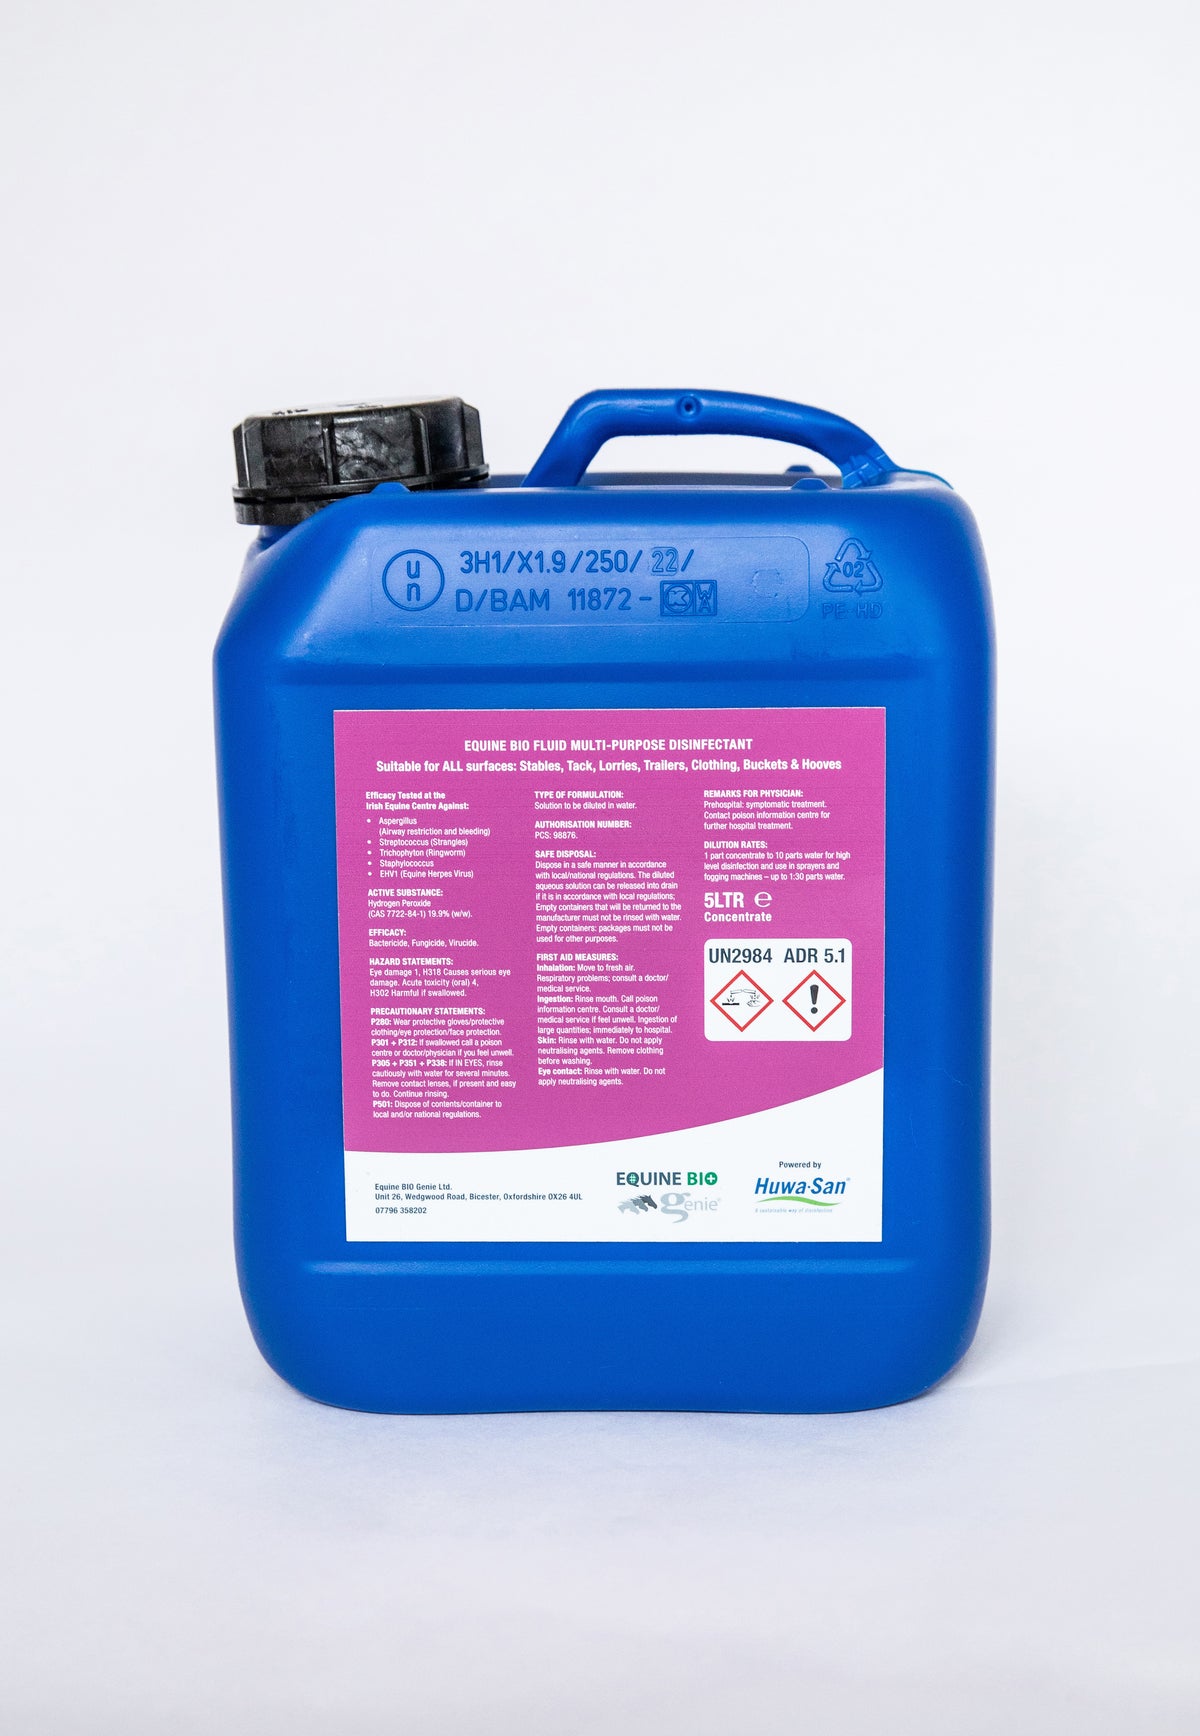 CONCENTRATE (5 Litre) - Equine Bio Fluid - dilution needed